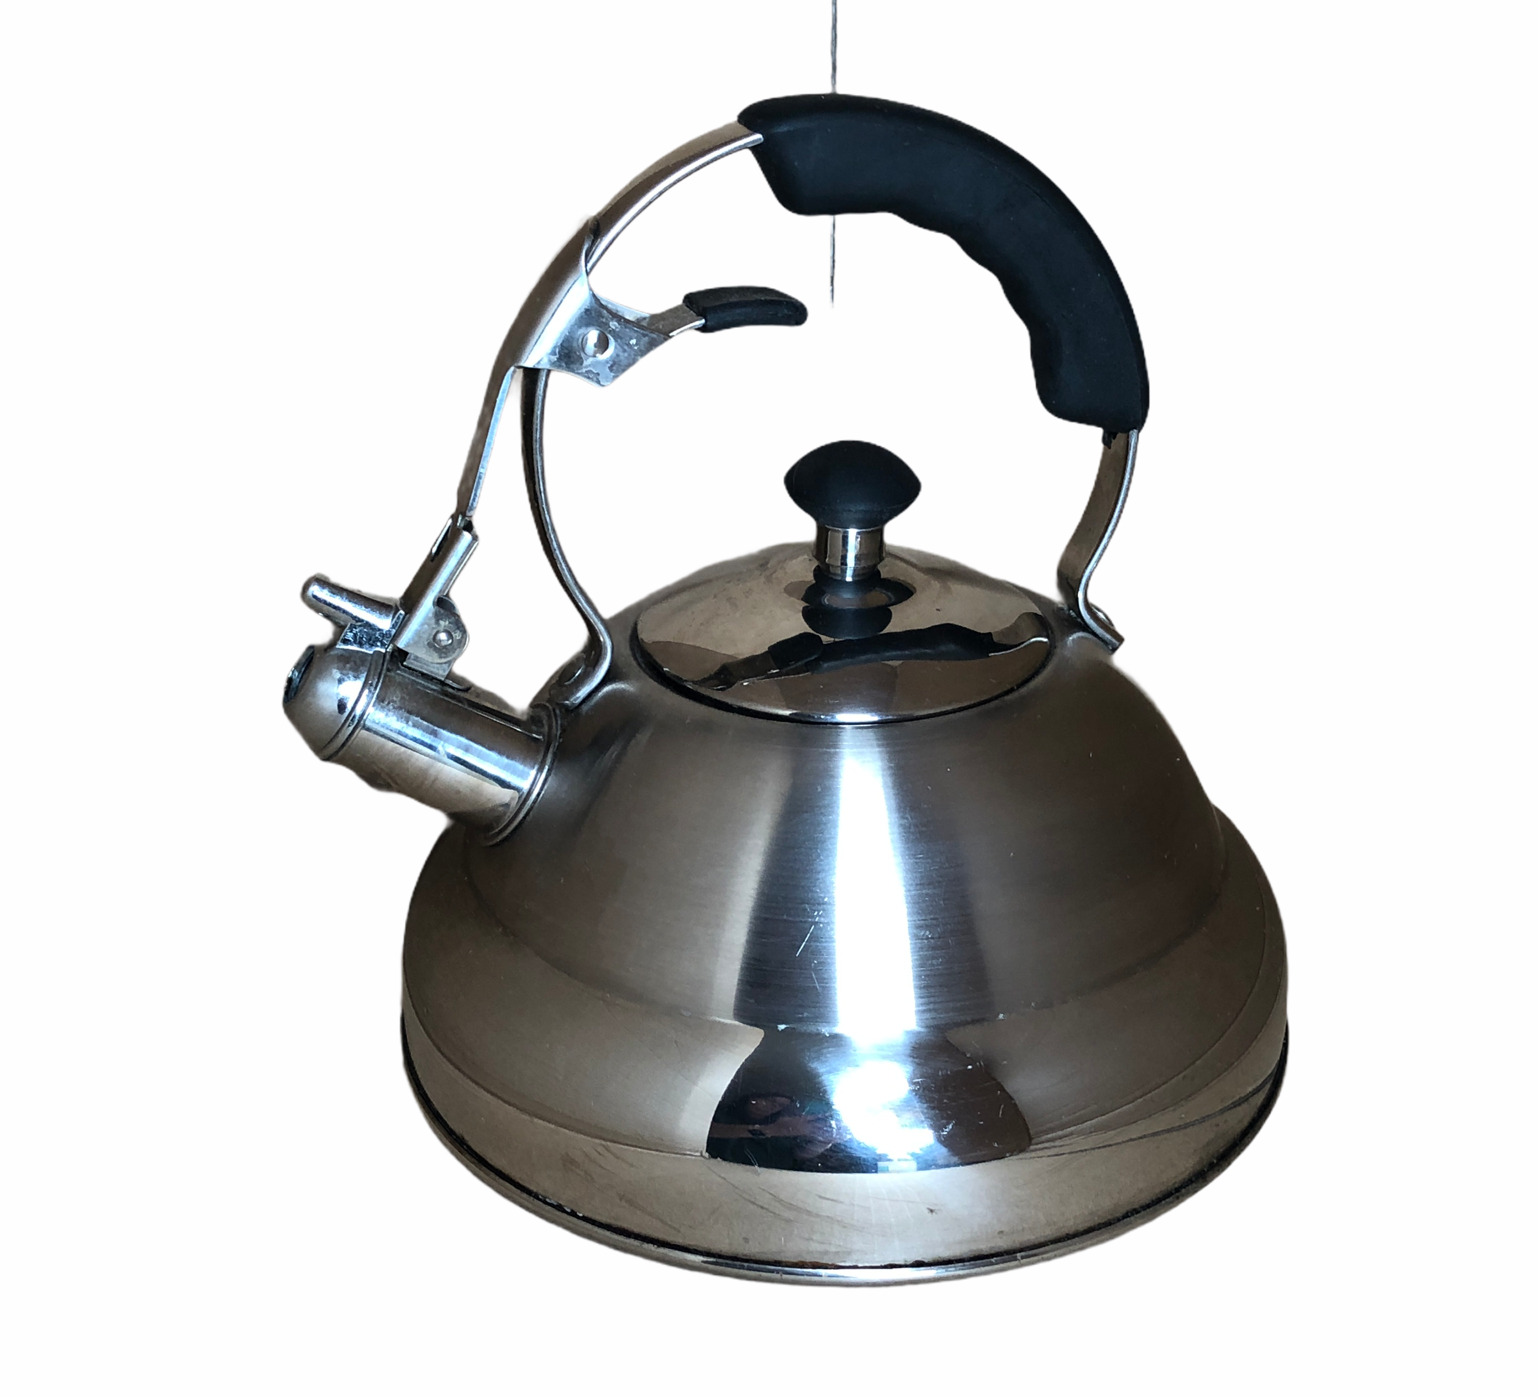 Tramontina Tea Kettle 18/10 Stainless Steel 2 Quart Insulated Handle